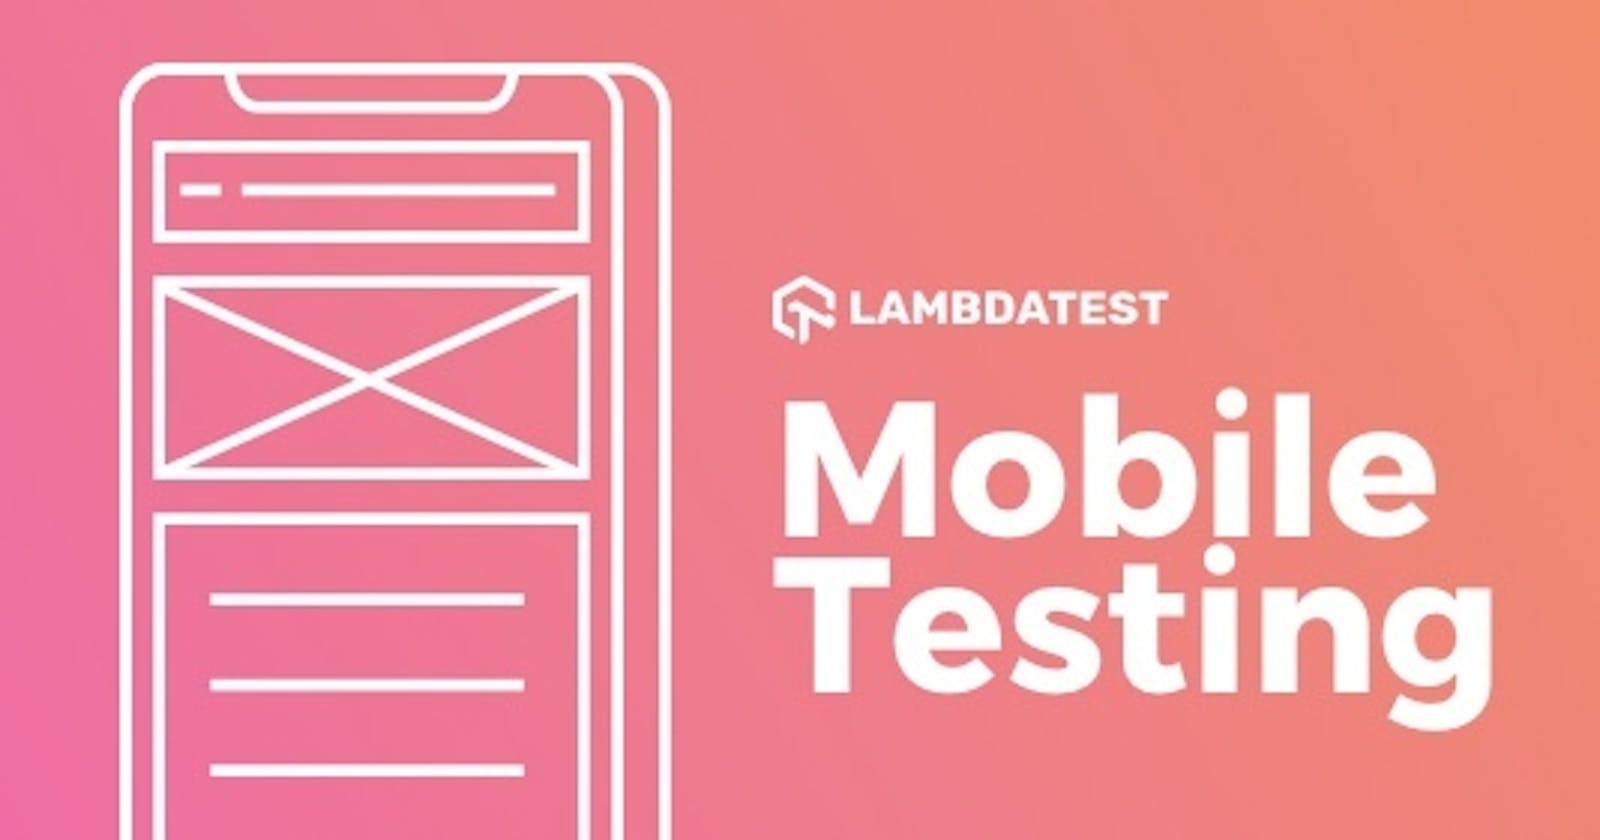 Mobile Testing Tutorial: Guide to Web and Native Mobile App Testing